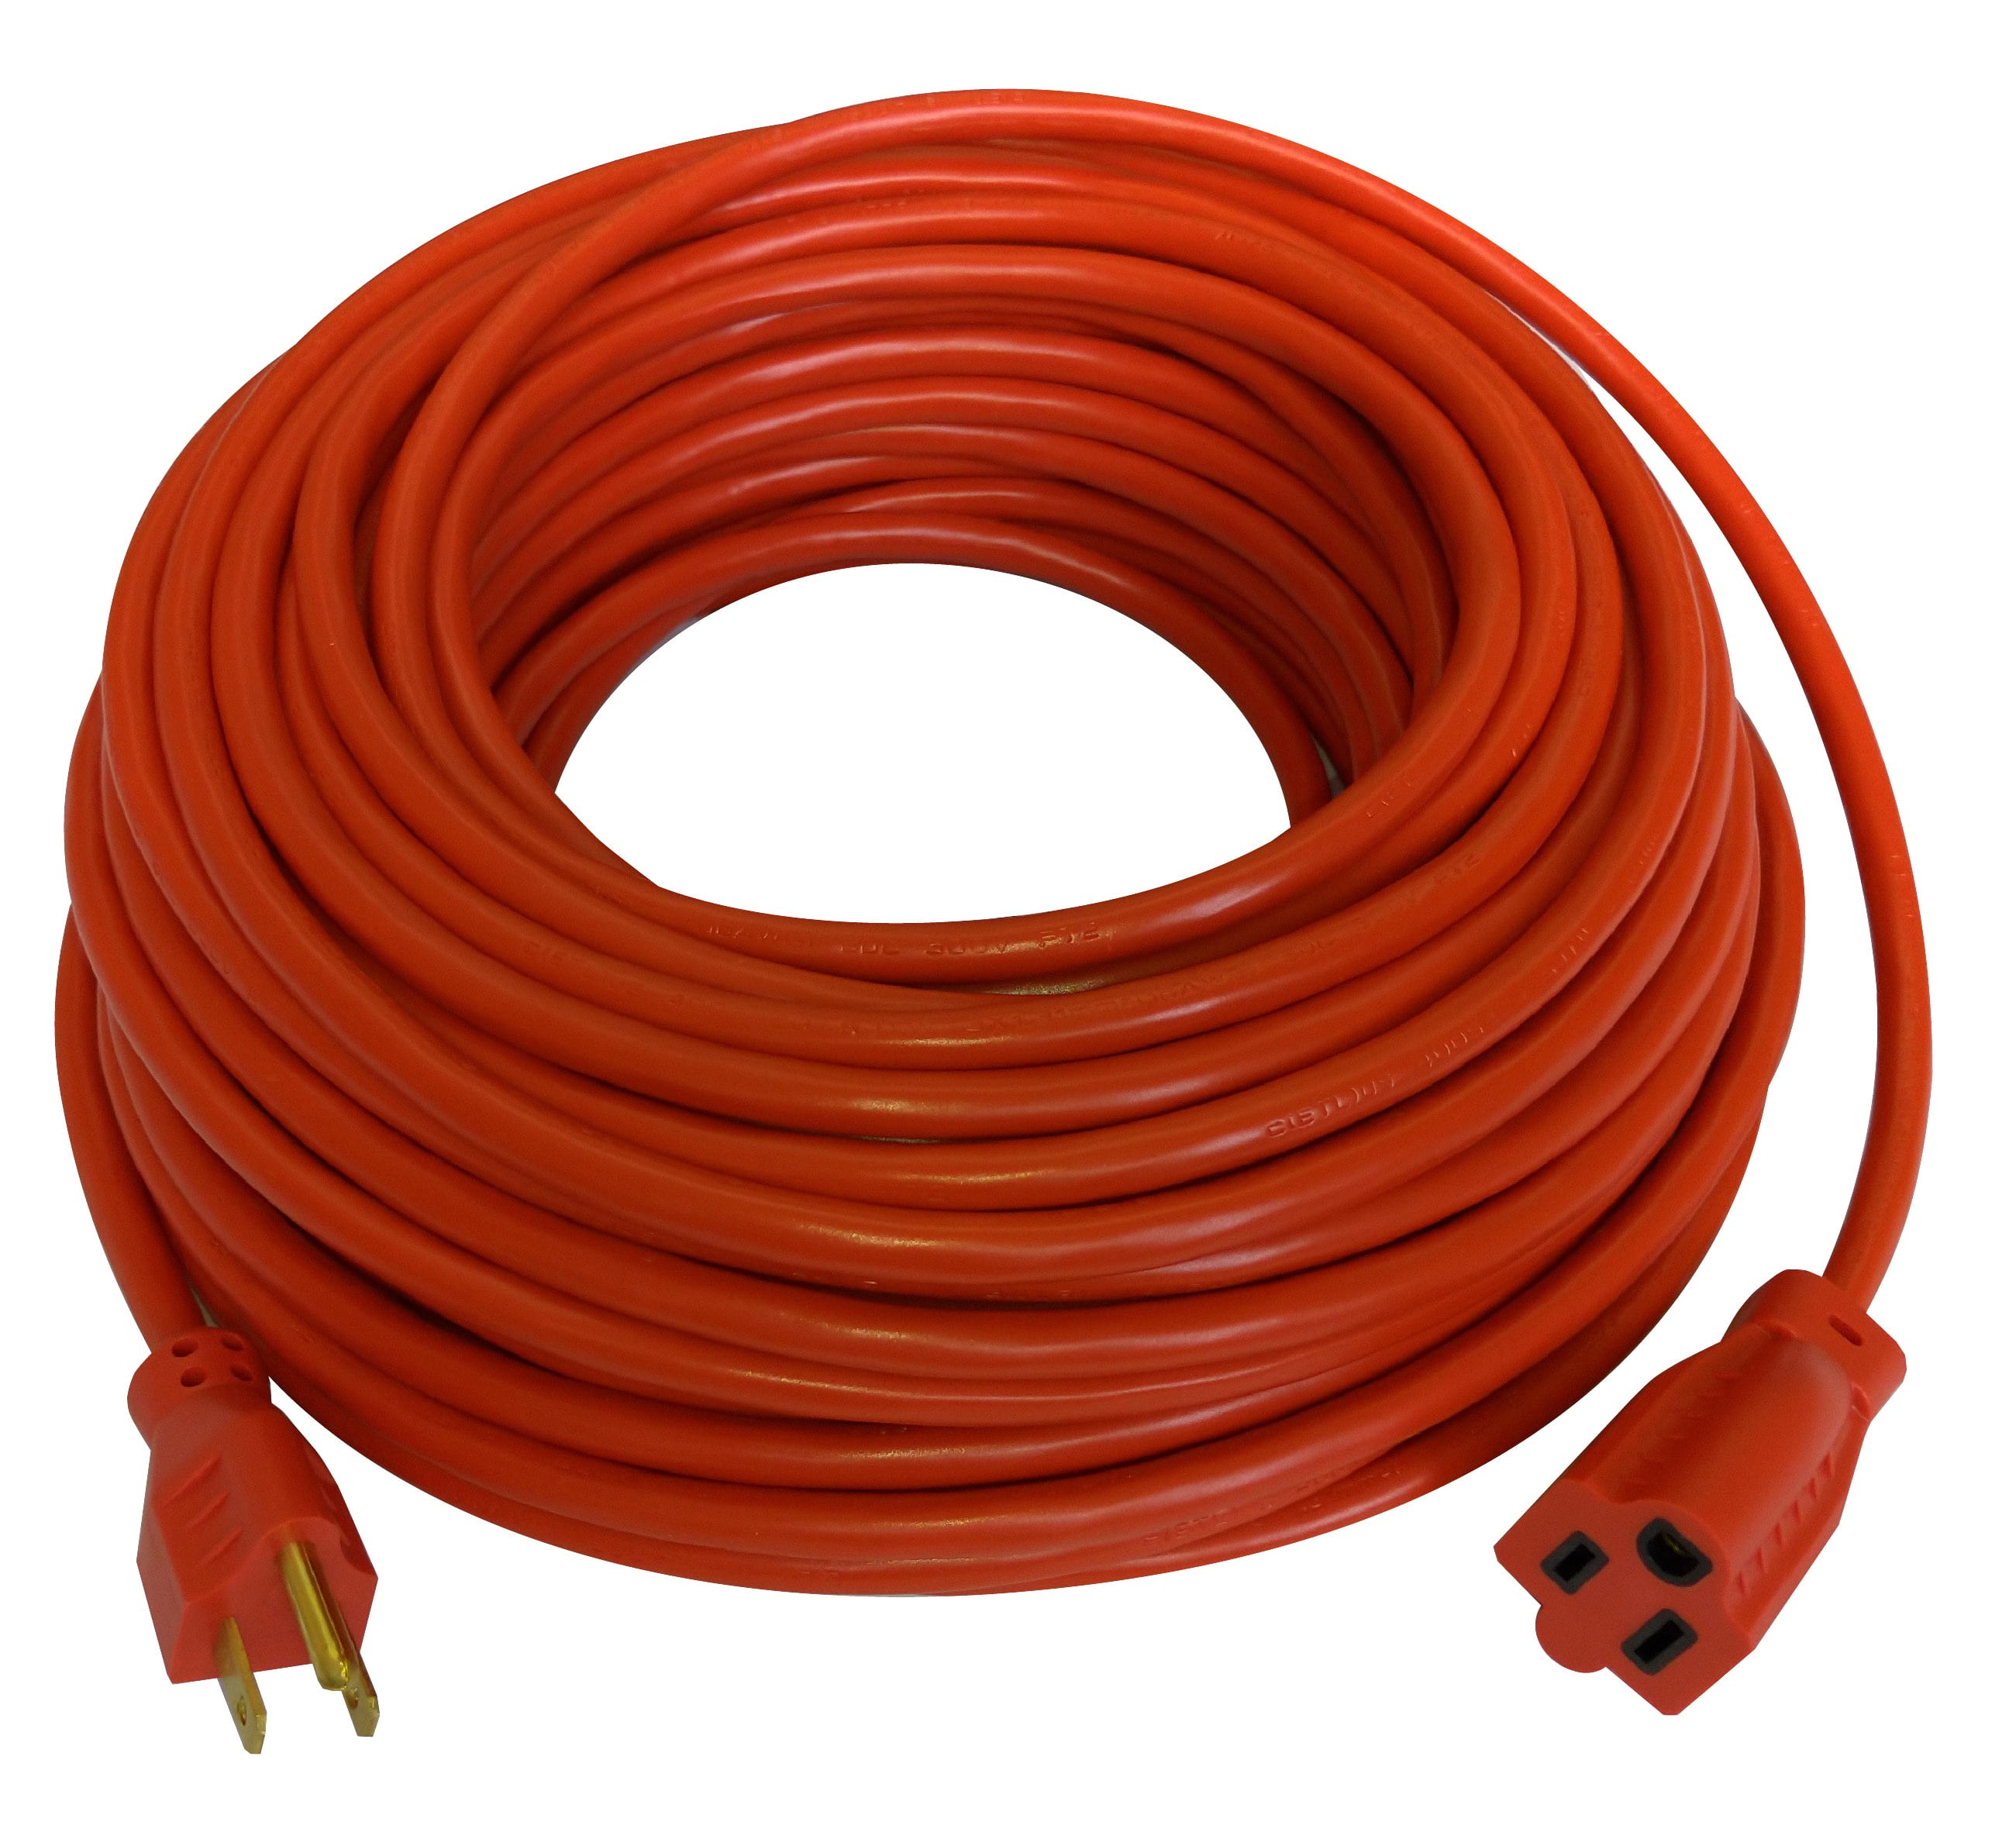 Hyper Tough 16AWGX3C 100ft Indoor and Outdoor Light Duty Orange Vinyl  Extension Cord